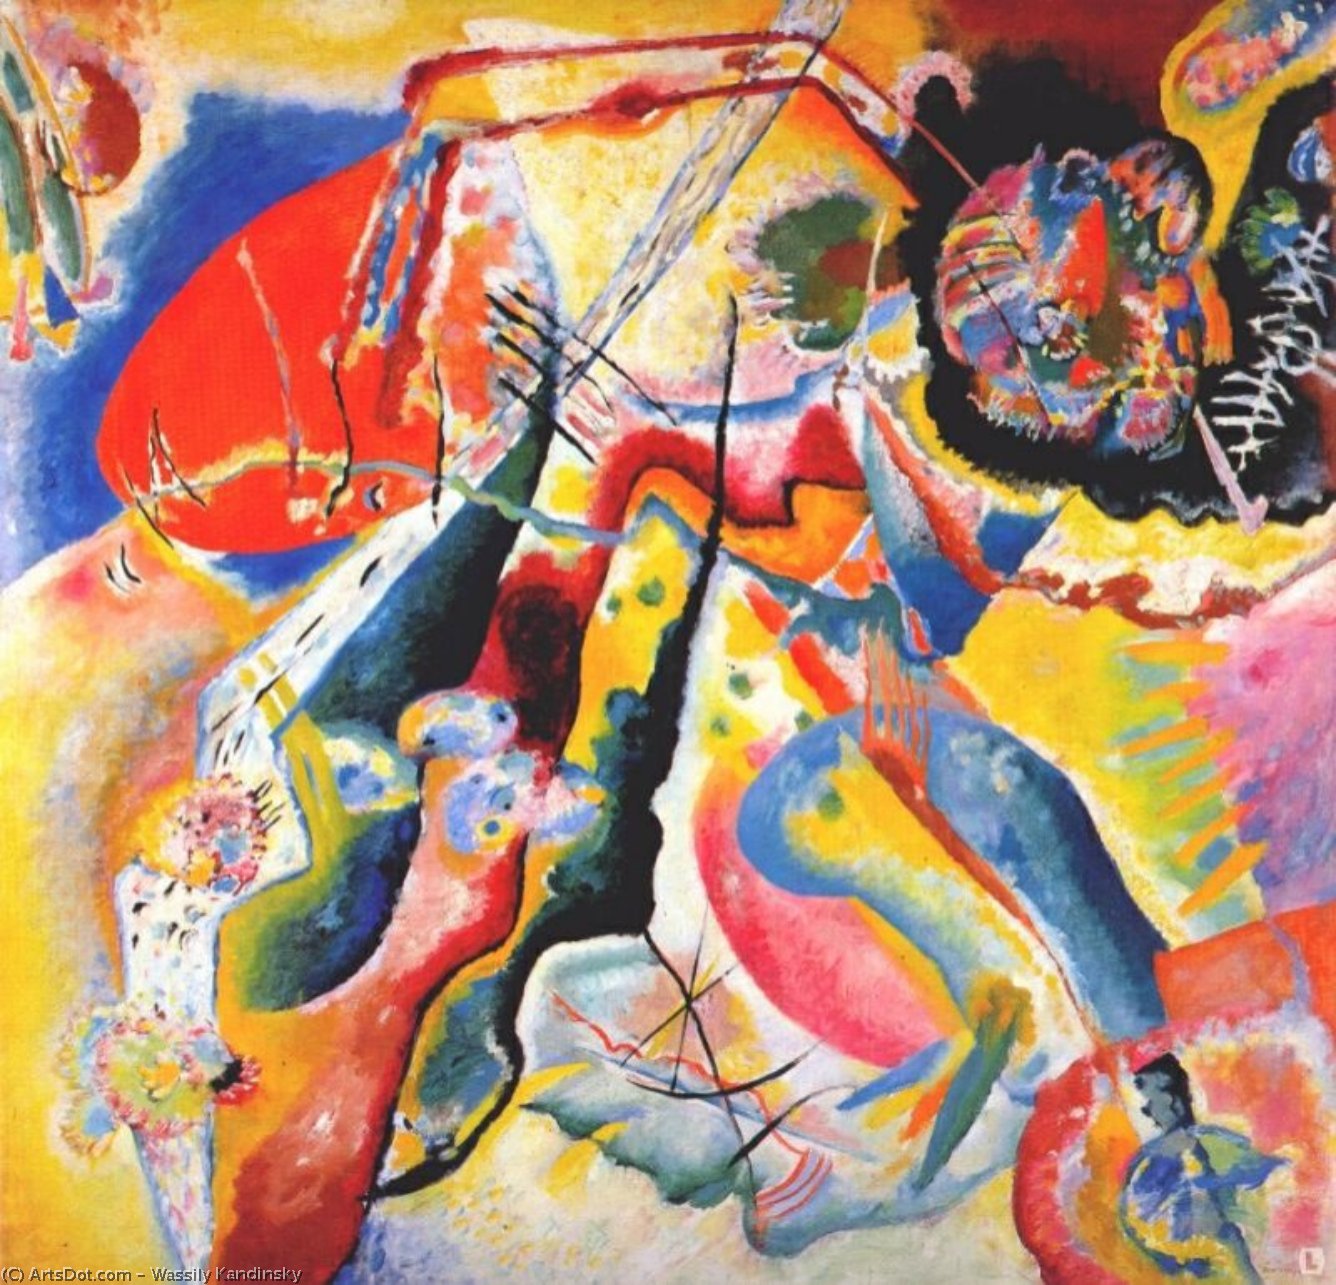 WikiOO.org - Encyclopedia of Fine Arts - Maleri, Artwork Wassily Kandinsky - Painting with red spot